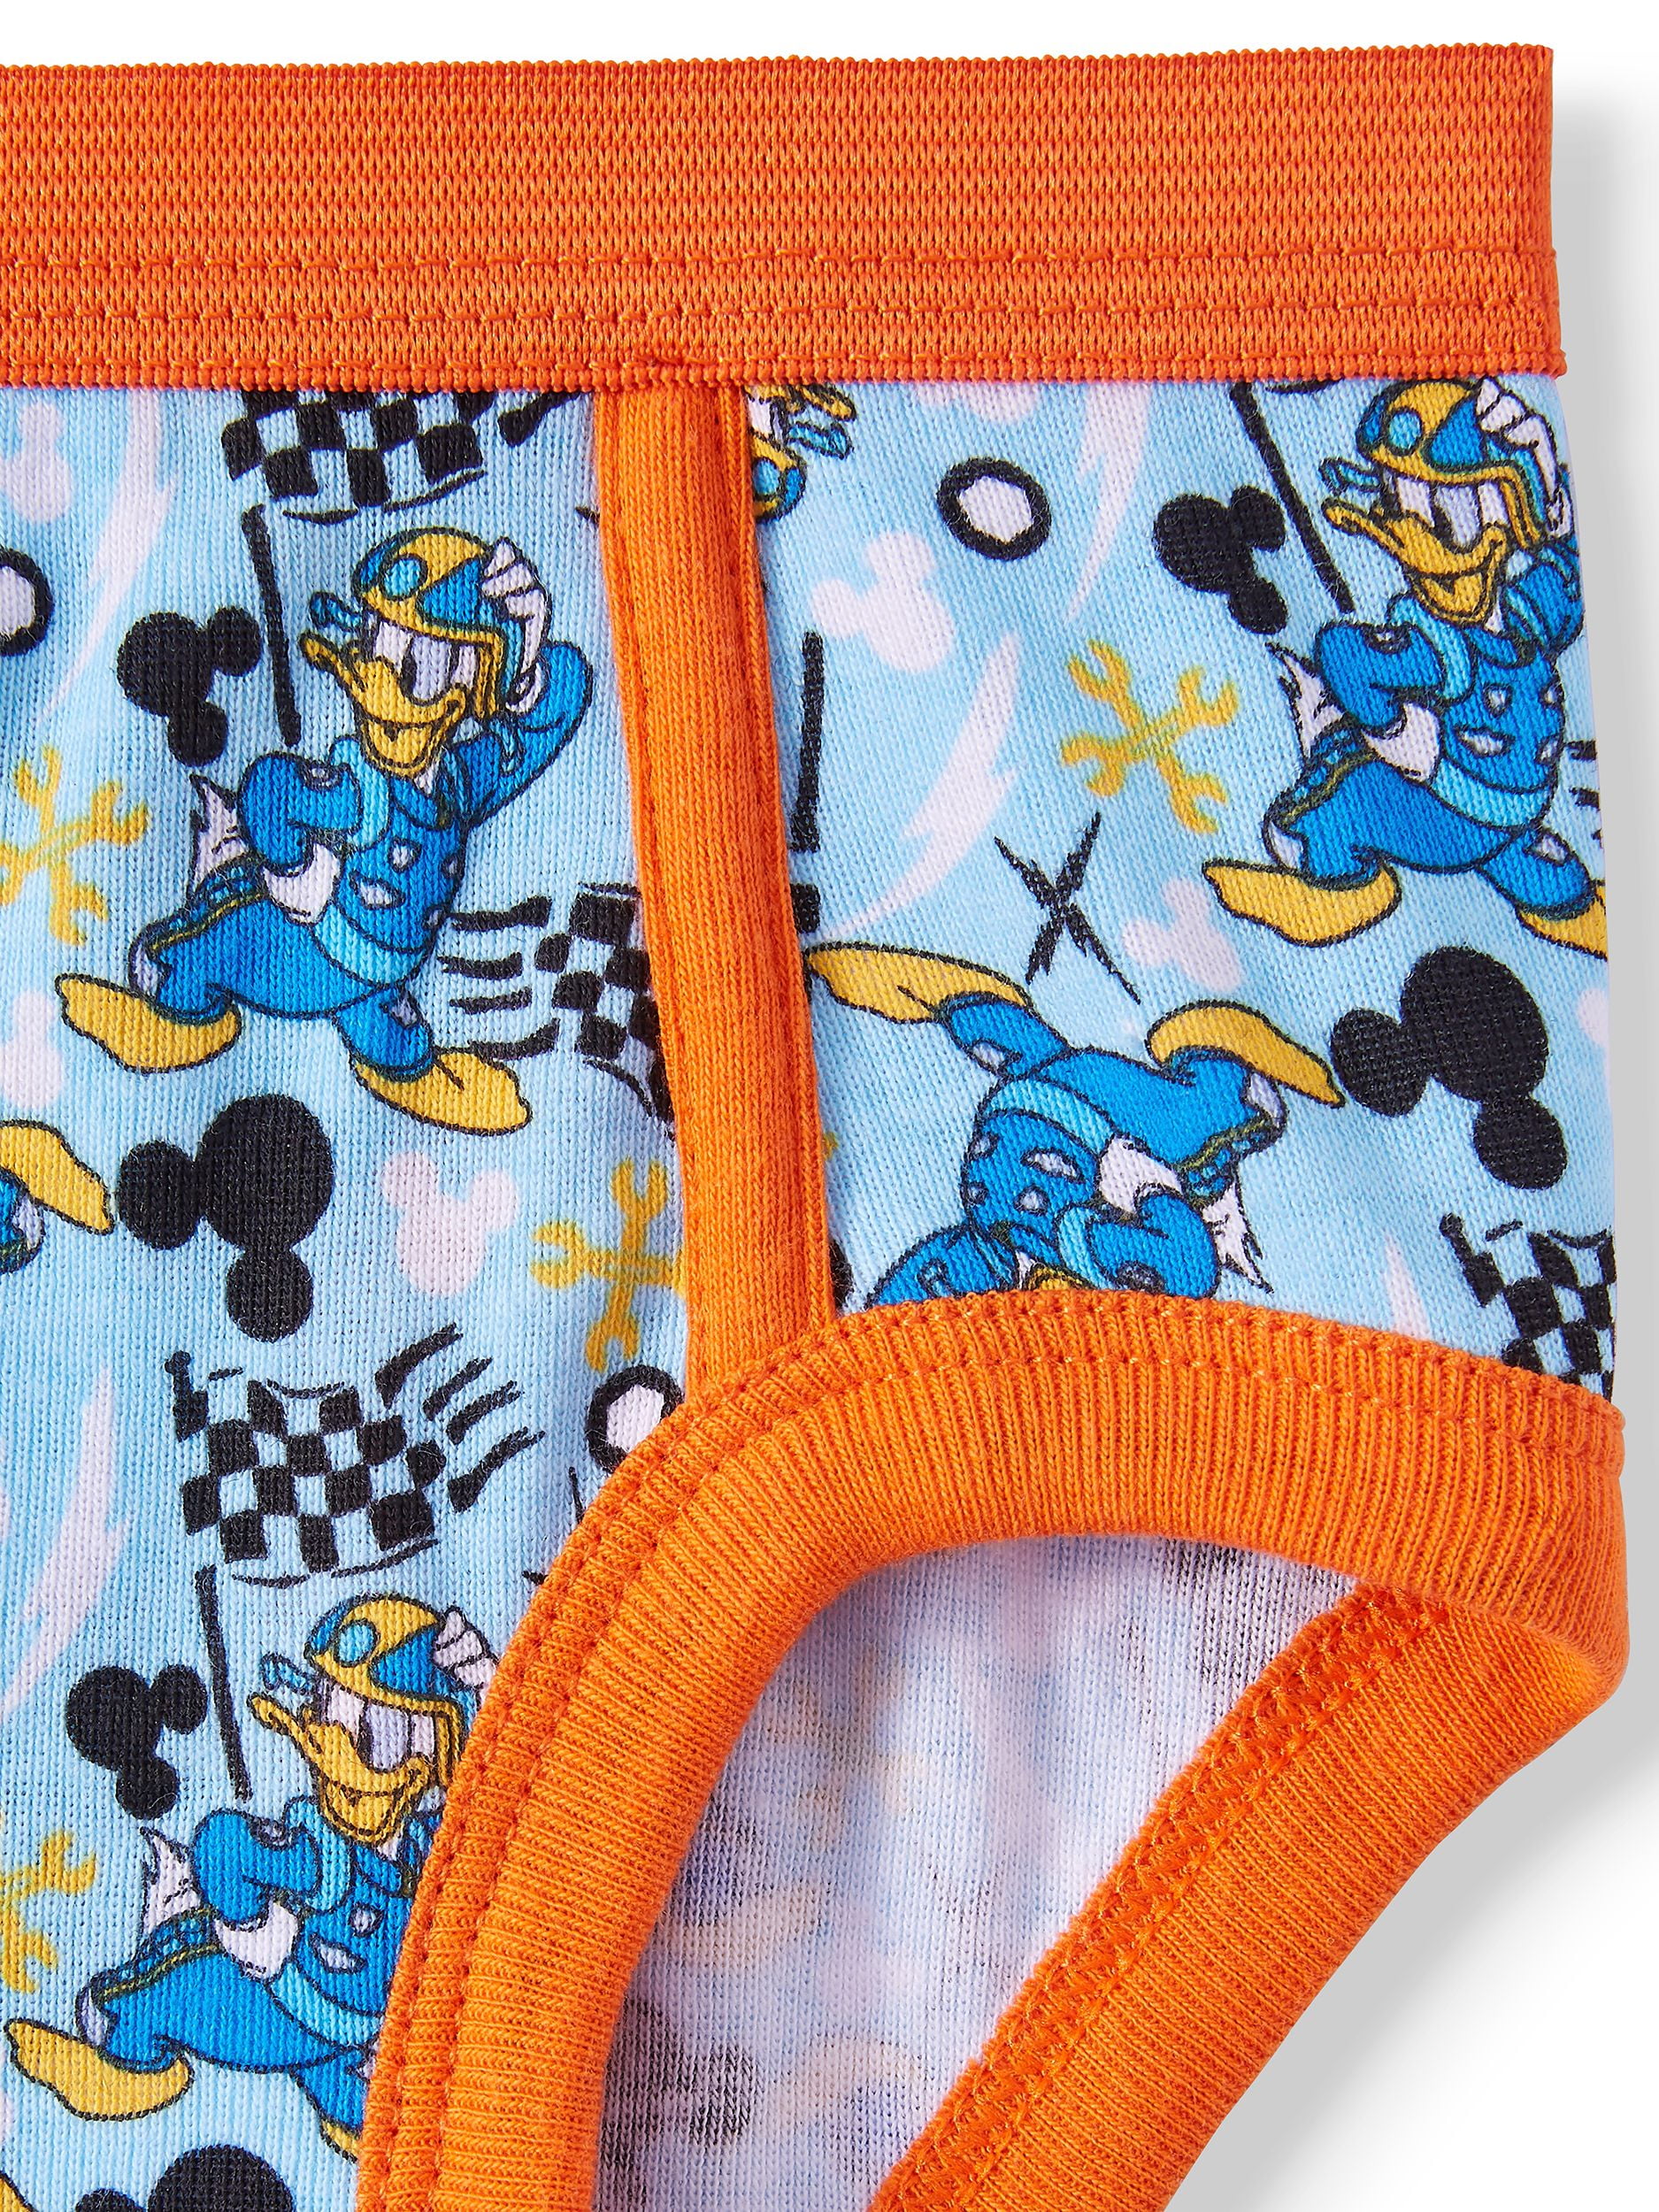 Mickey Mouse Briefs, 3-Pack (Toddler Boys) 